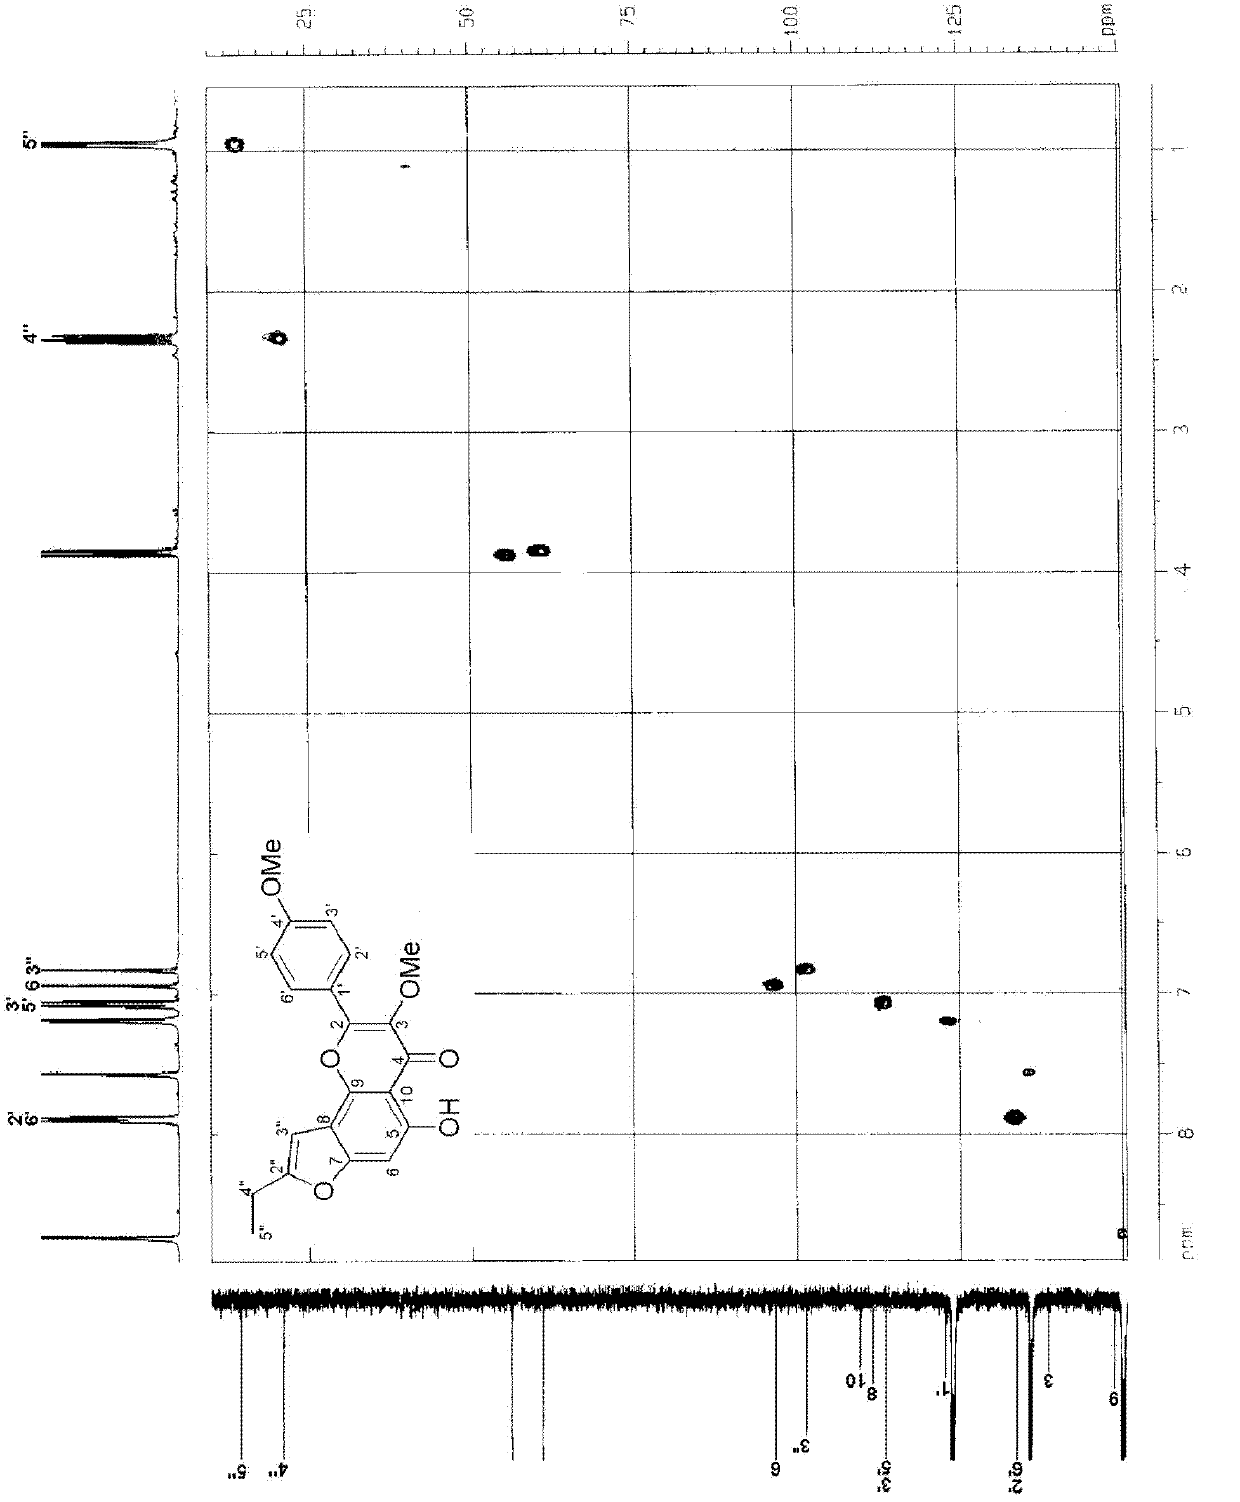 Furan flavonoid compound in nicotiana tobacum and application thereof